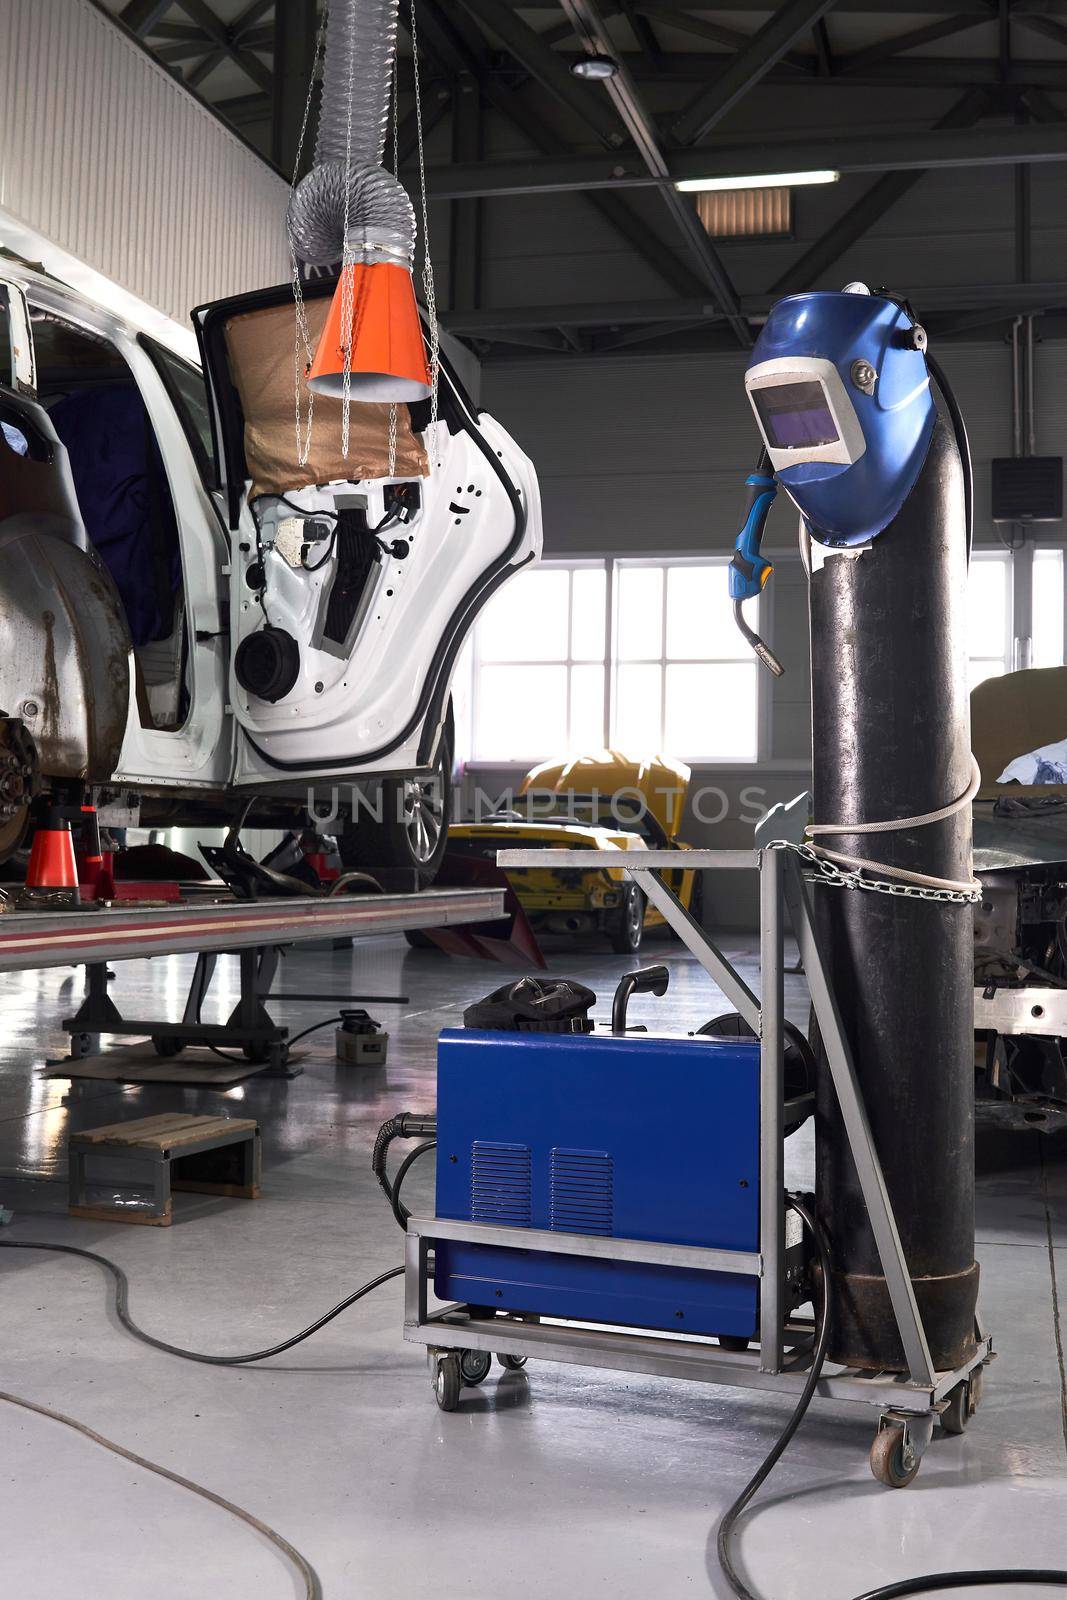 Welding equipment in a car repair station, no people